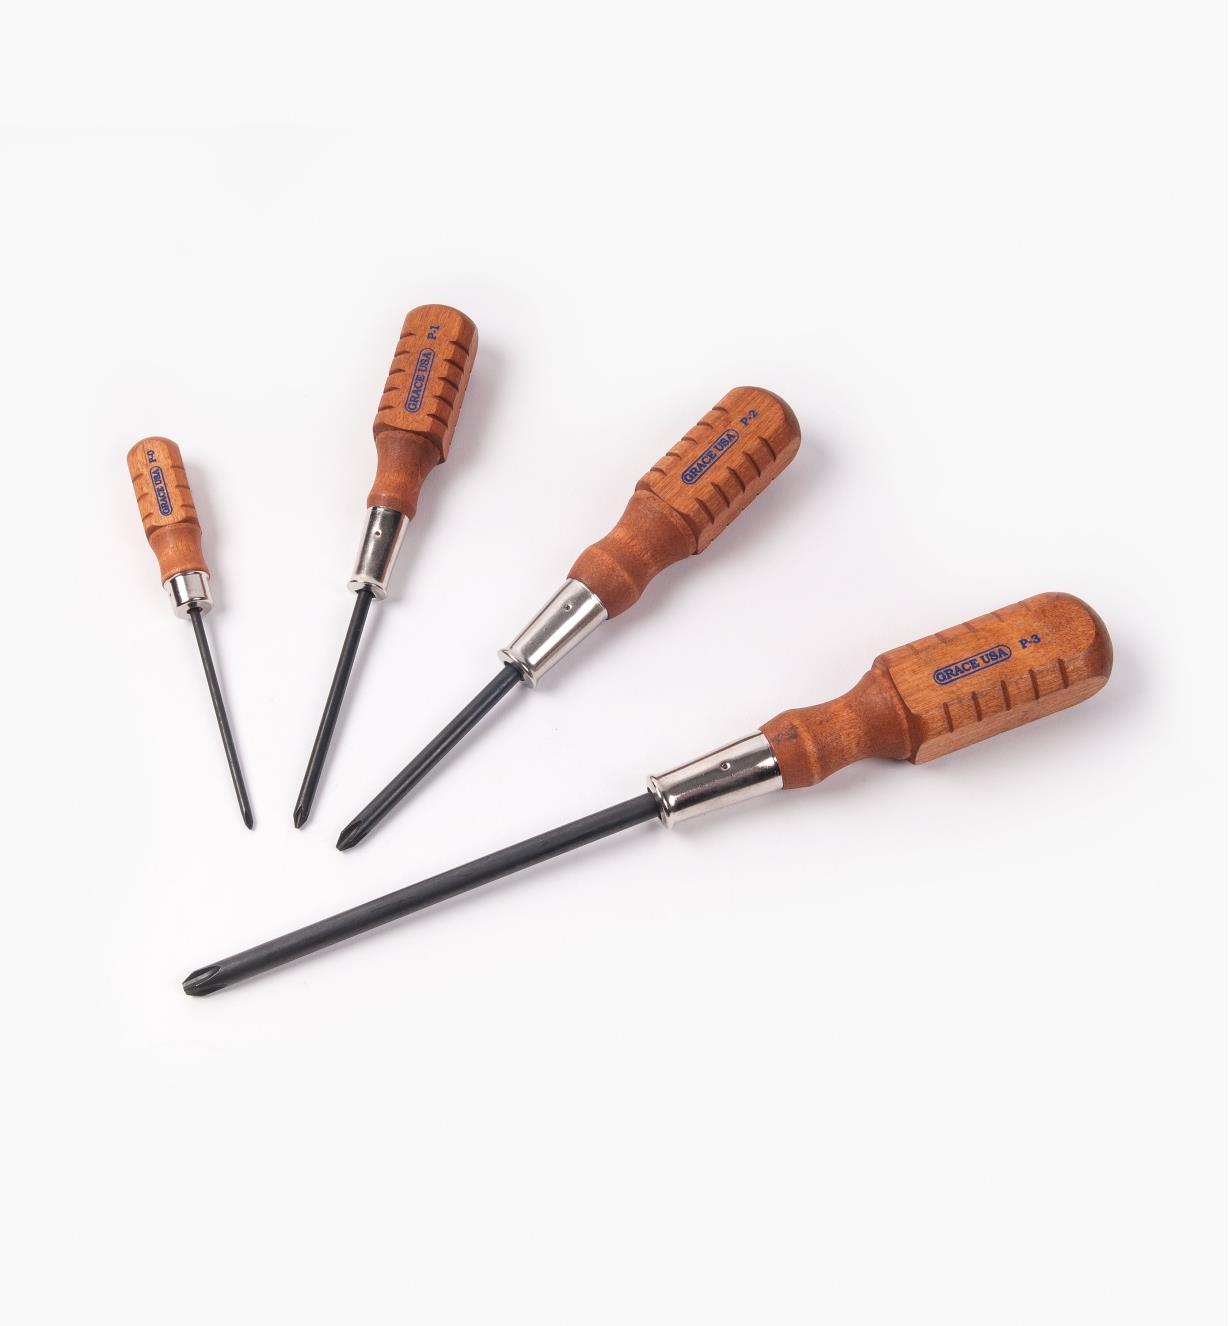 1/4”- Nut Driver 1/4” 5/16” 6 in 1 screwdriver Phillips #1 #2 -Slotted 3/16”